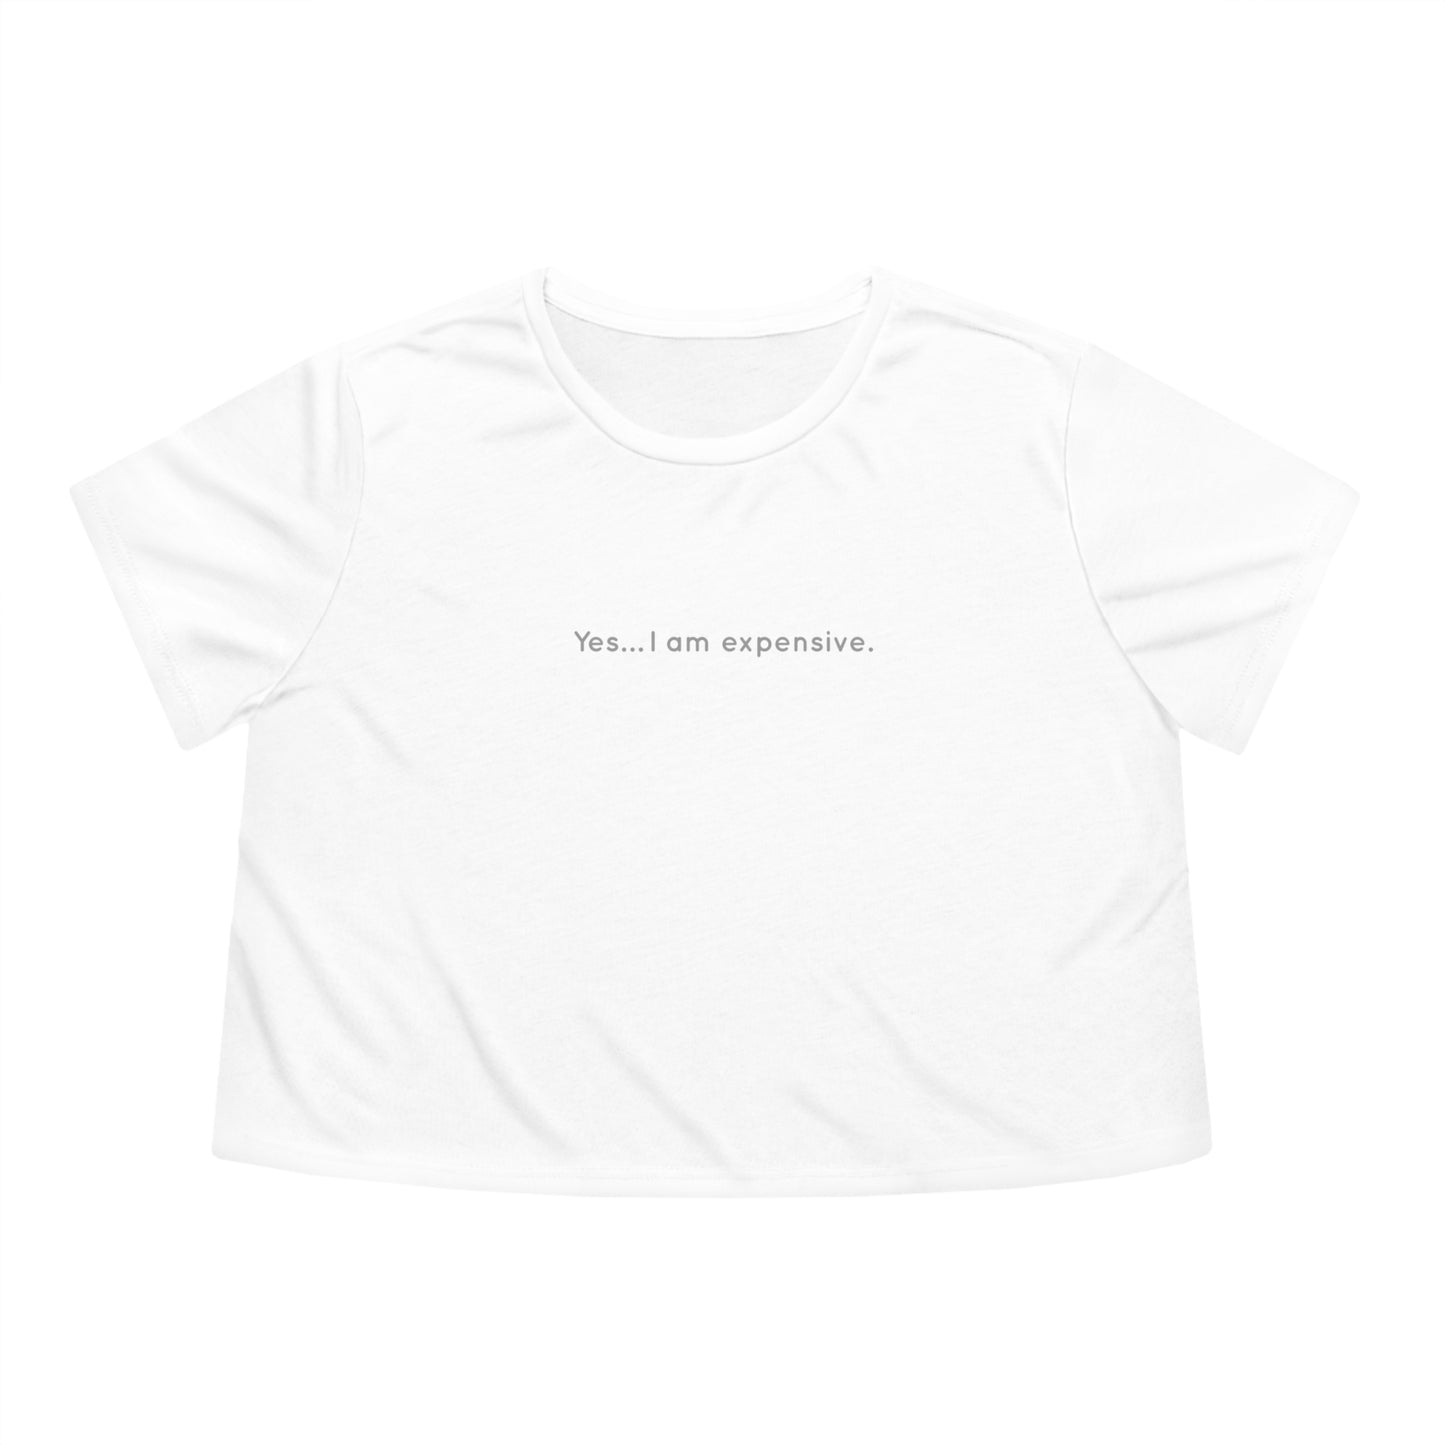 "Yes... I am expensive." - Cropped Tee